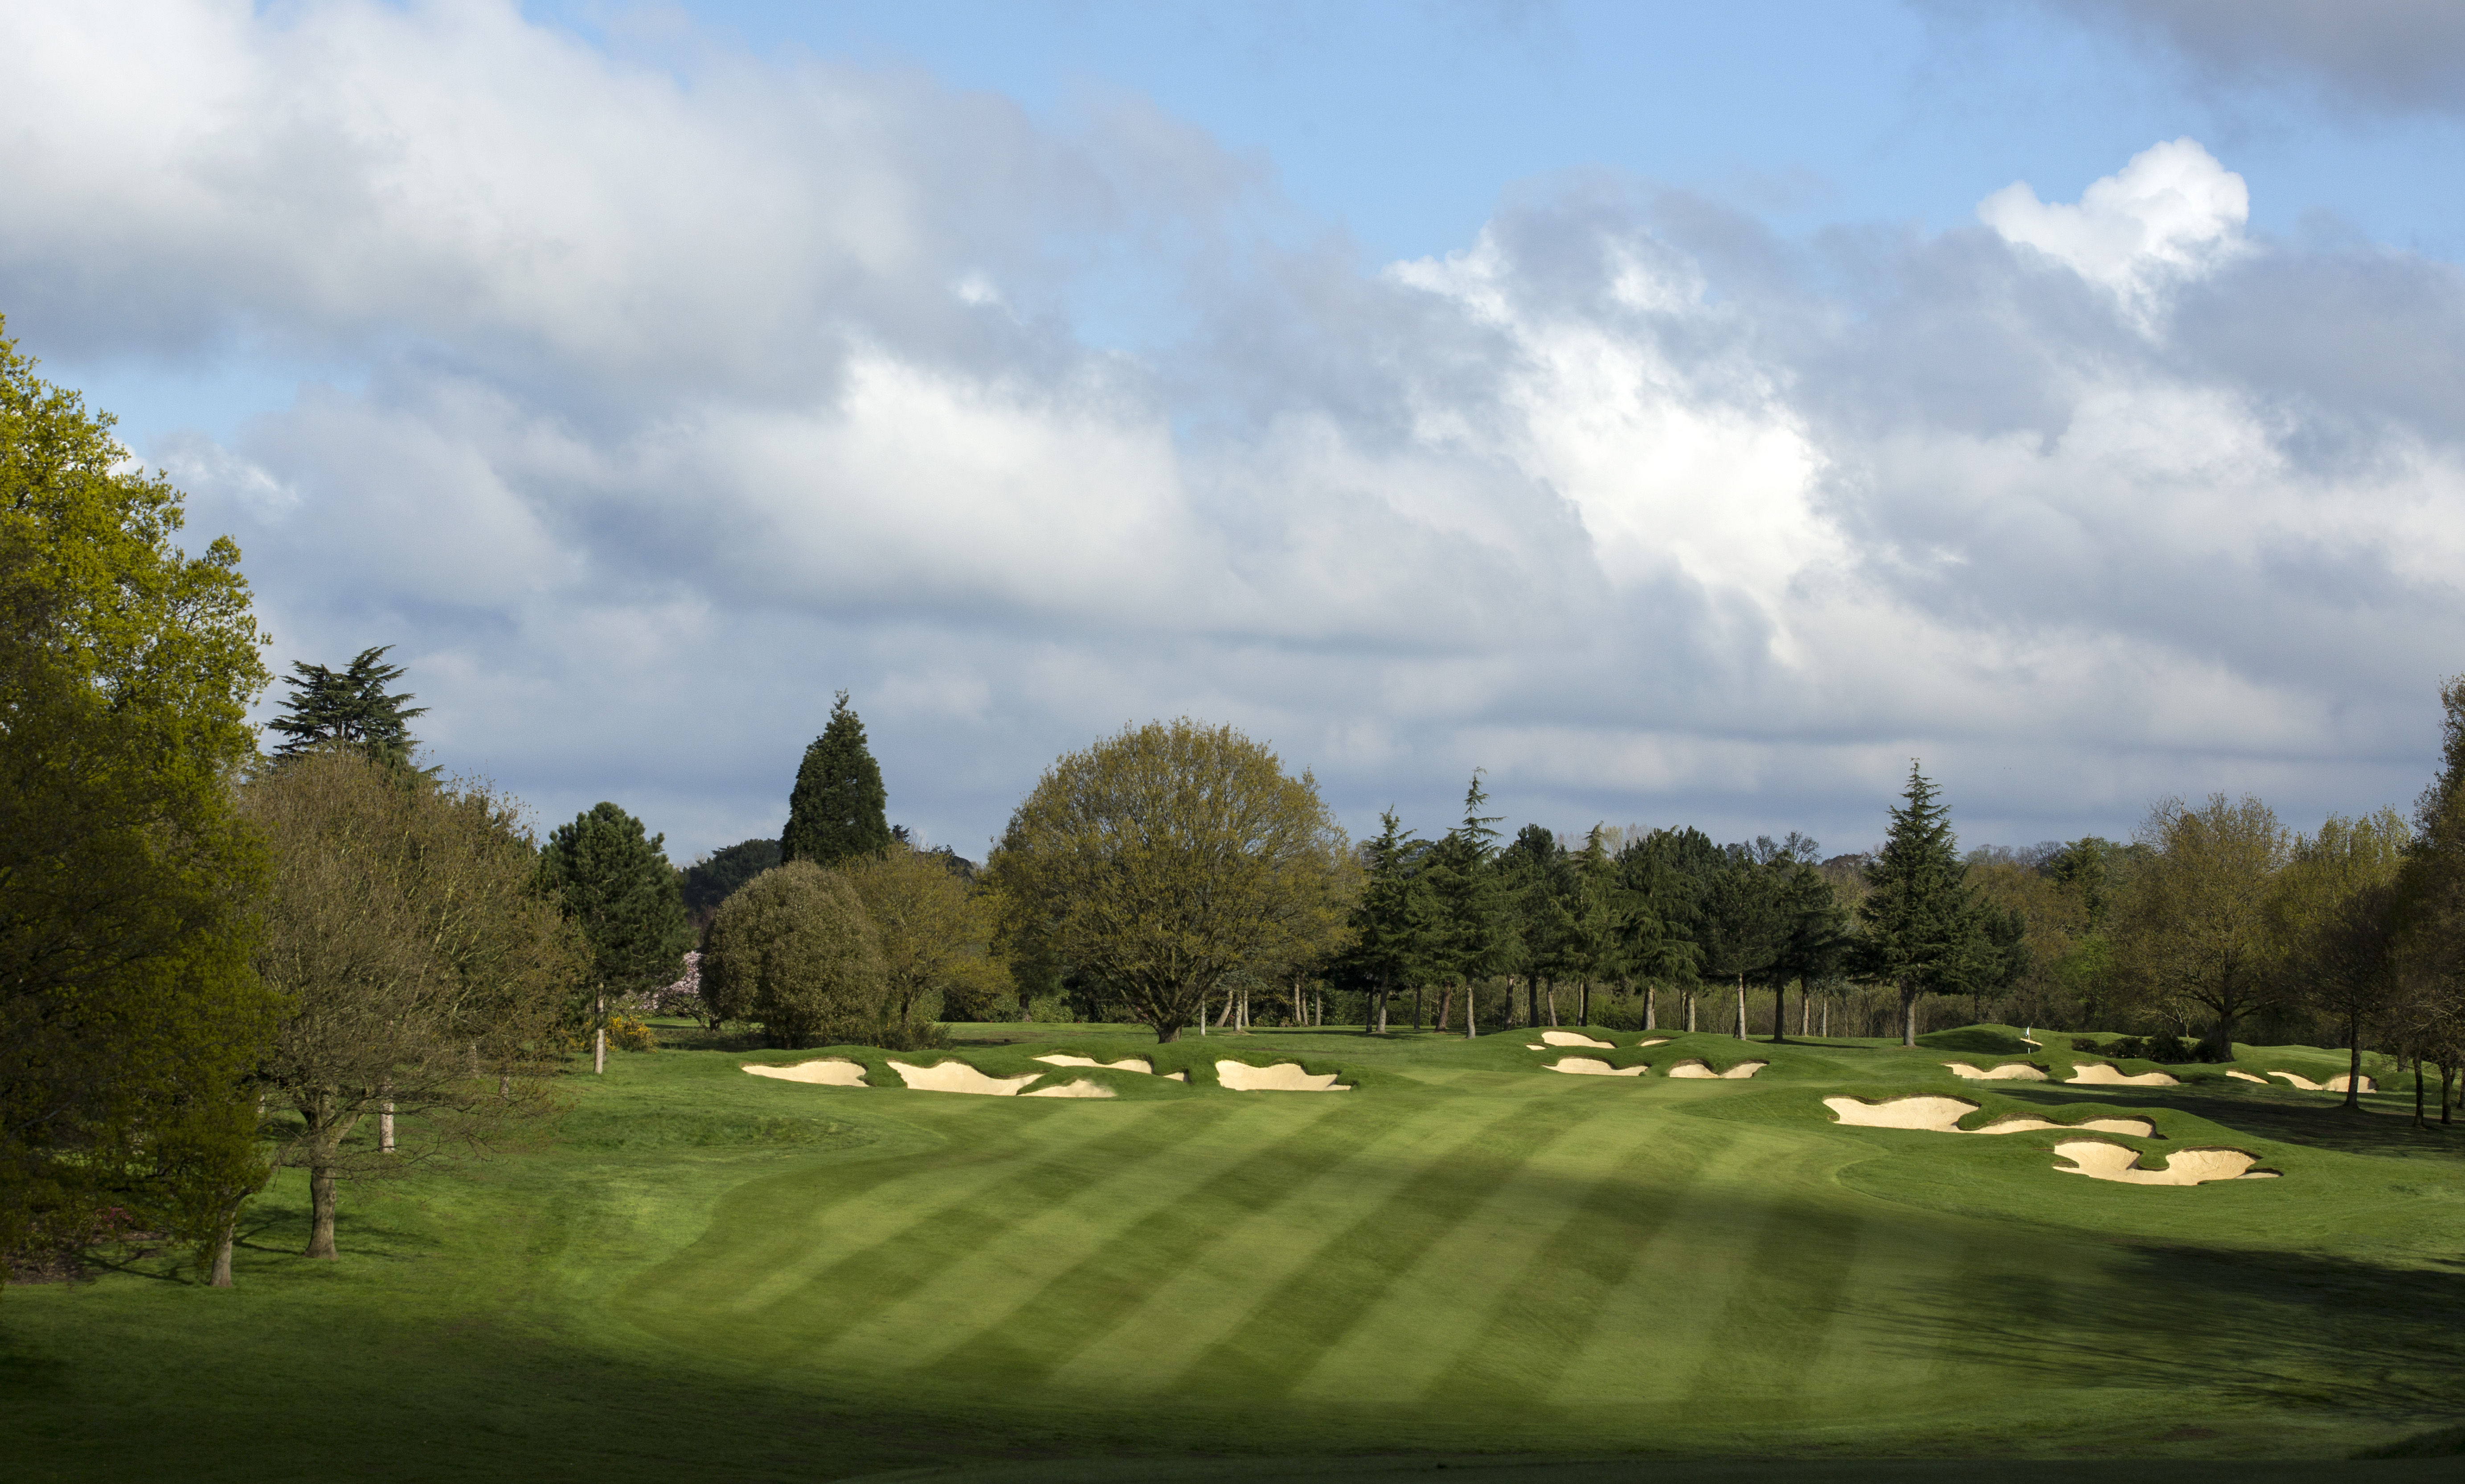 Stoke Park reopens renovated front nine 